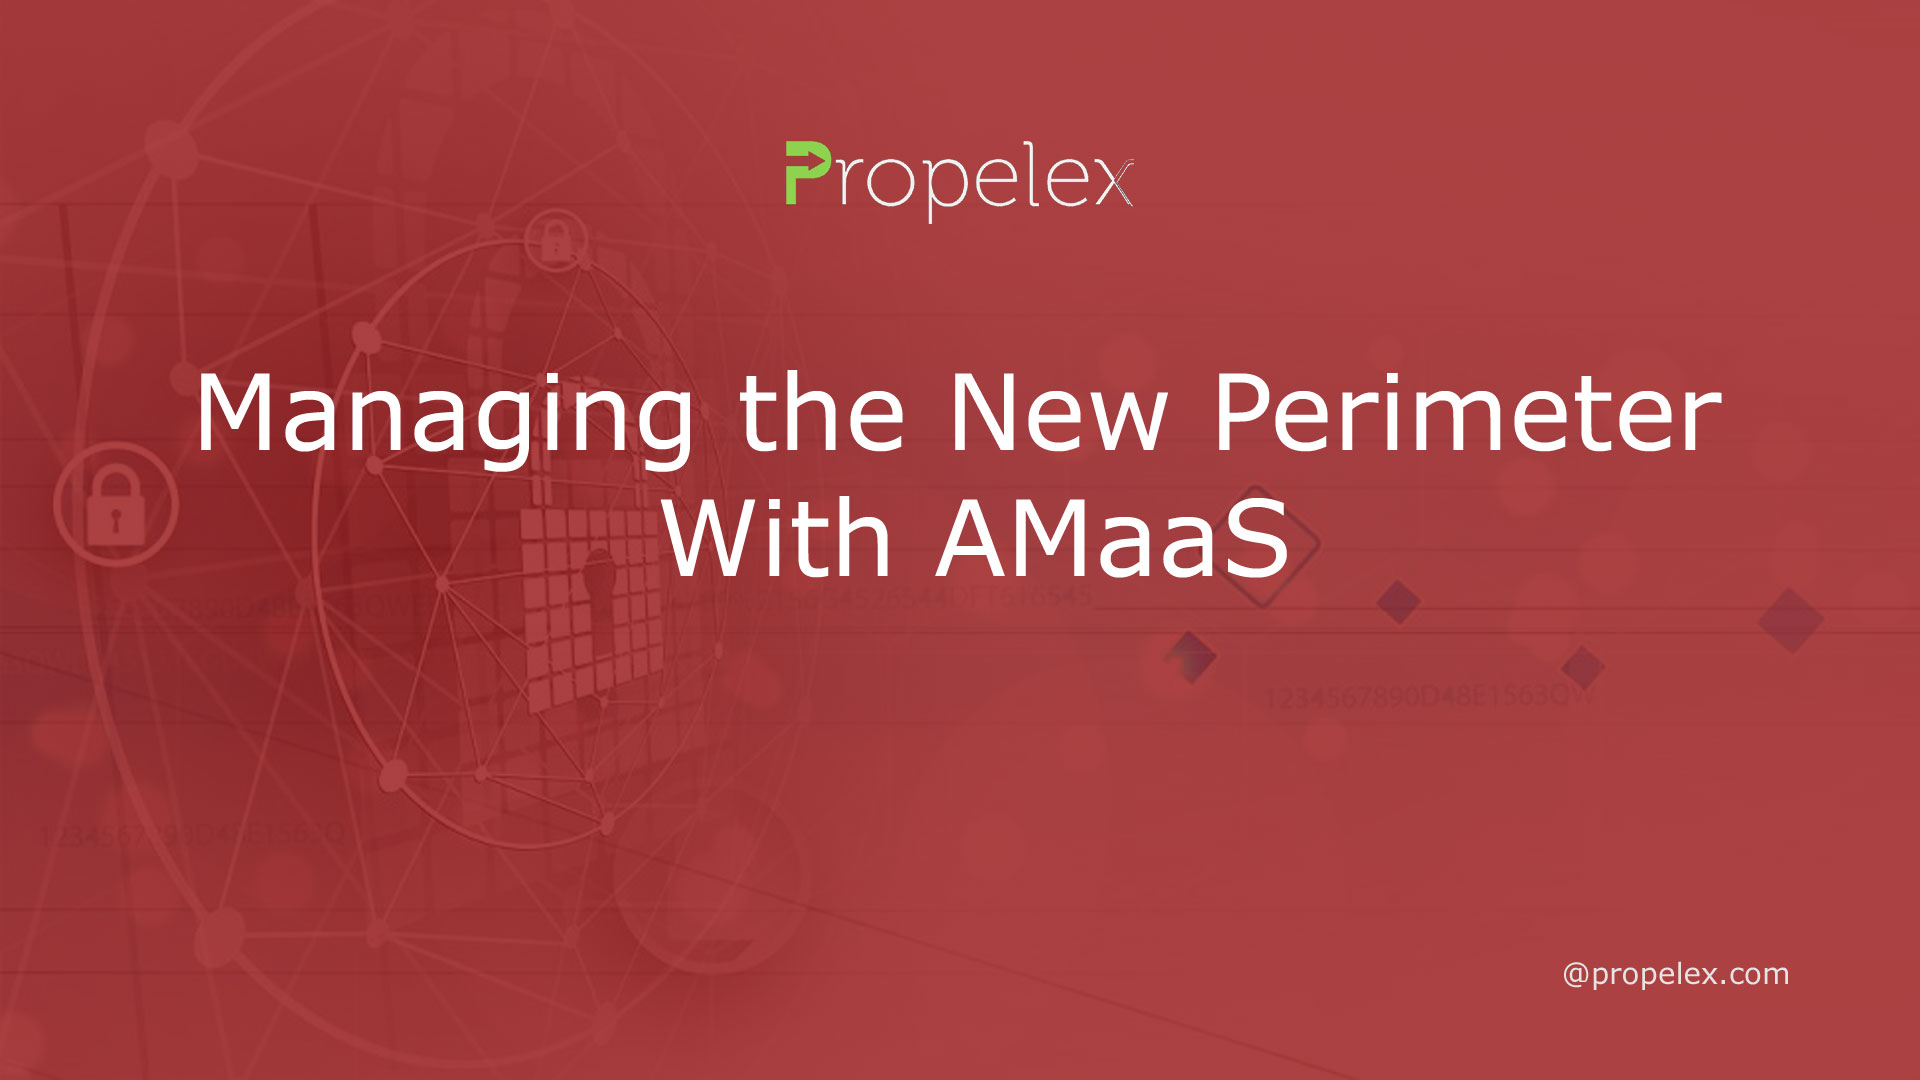 Managing the New Perimeter With AMaaS